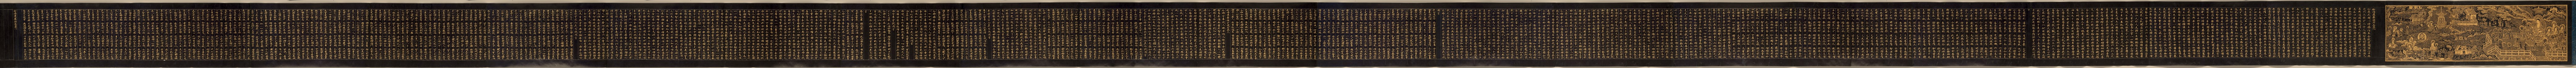 Frontispiece for the Lotus Sutra, late 1100s. Creator: Unknown.